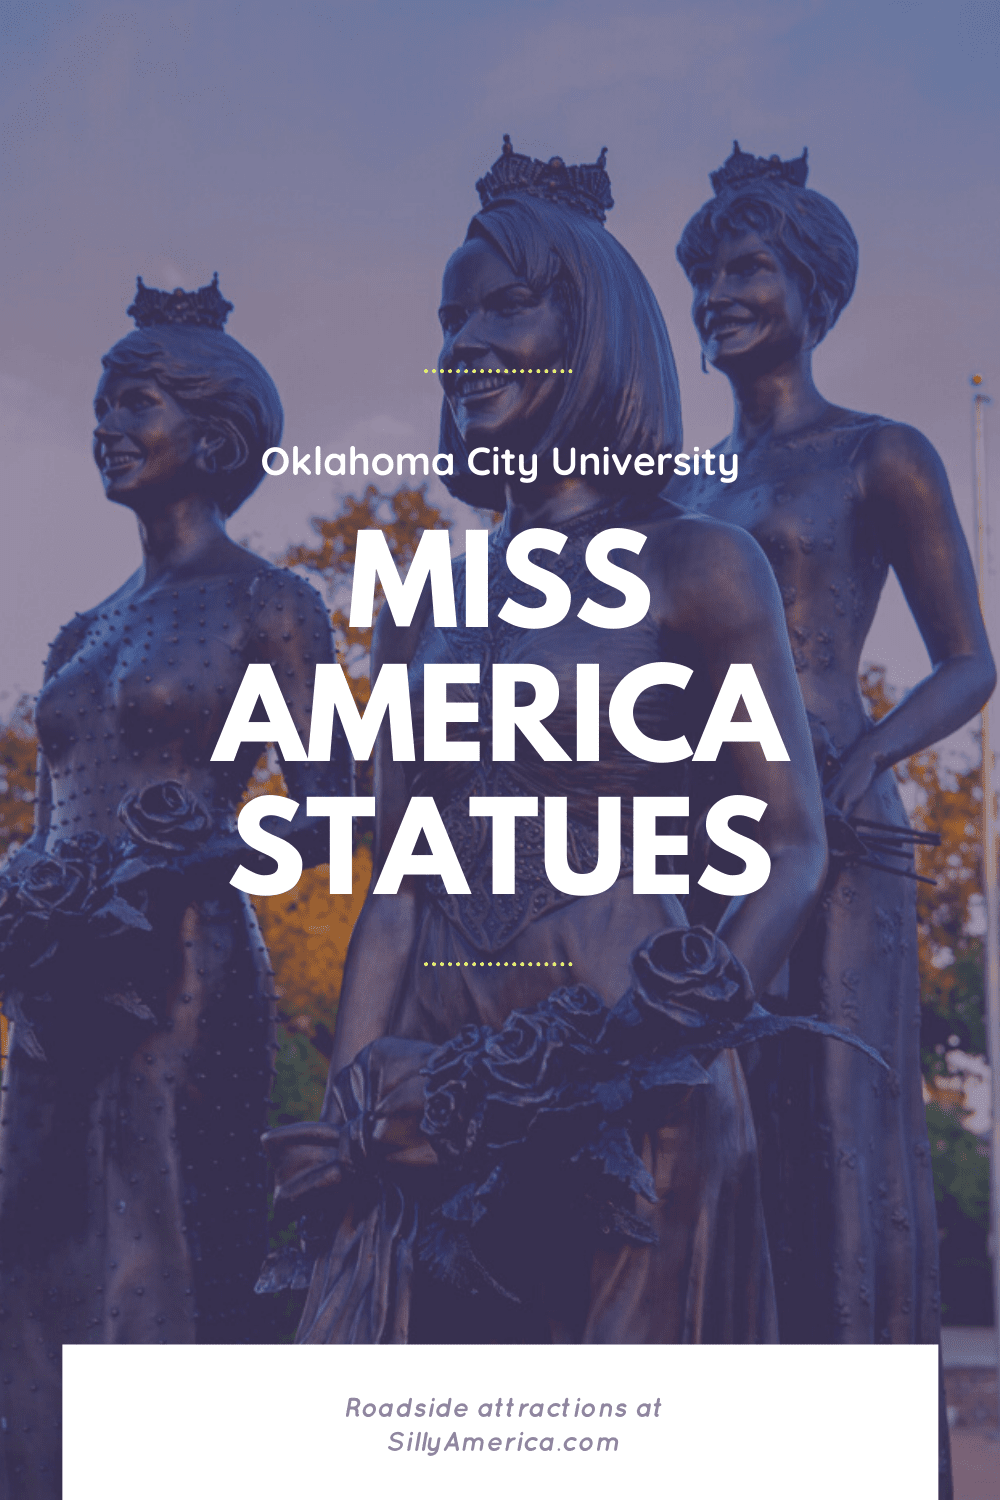 Here she is: Miss America. And here she is again. And again. Oklahoma City University has been home to three winners of the famed pageant and they are commemorated on campus with bronze Miss America statues.  #RoadTrips #RoadTripStop #Route66 #Route66RoadTrip #OklahomaRoute66 #Oklahoma #OklahomaRoadTrip #OklahomaRoadsideAttractions #RoadsideAttractions #RoadsideAttraction #RoadsideAmerica #RoadTrip